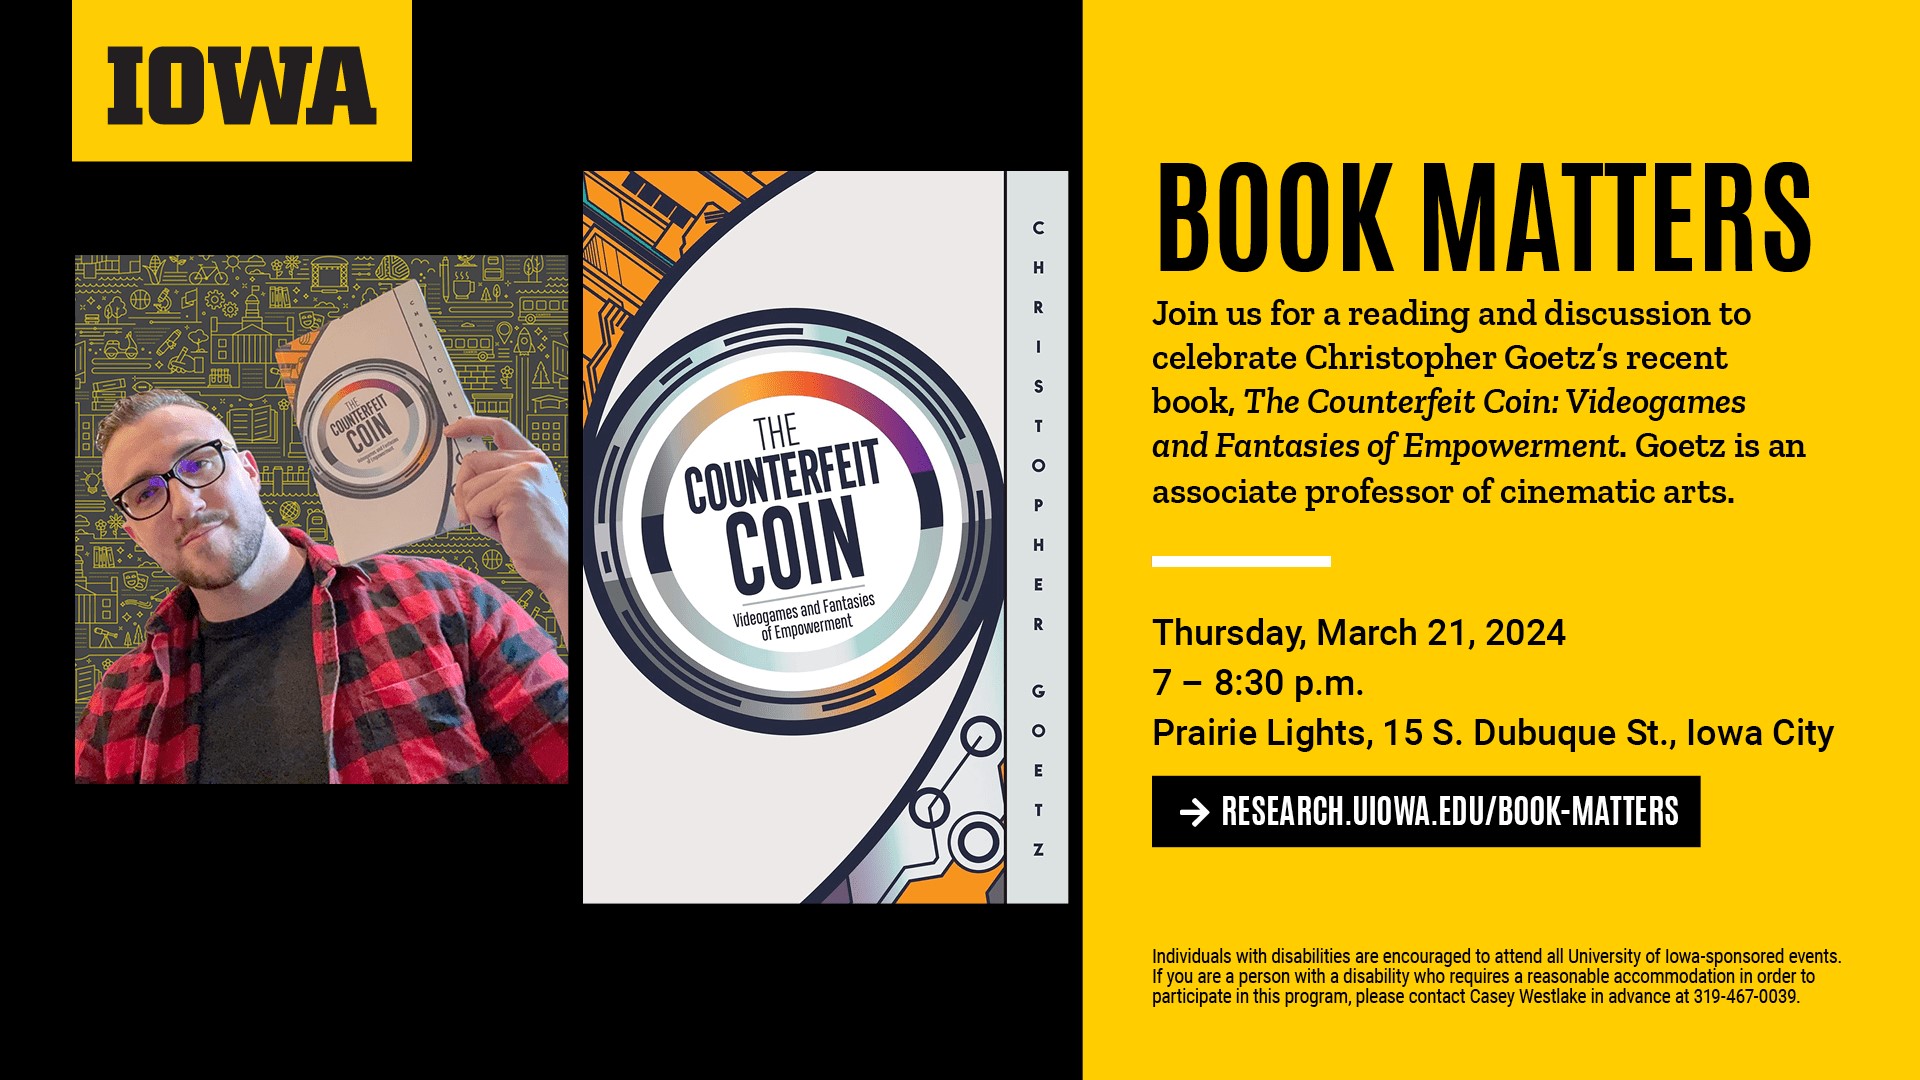 Join us for a reading and discussion to celebrate Christoper Goetz's recent book, The Counterfeit Coin: Videogames and Fantasies of Empowerment. Goetz is an associate professor of cinematic arts. 